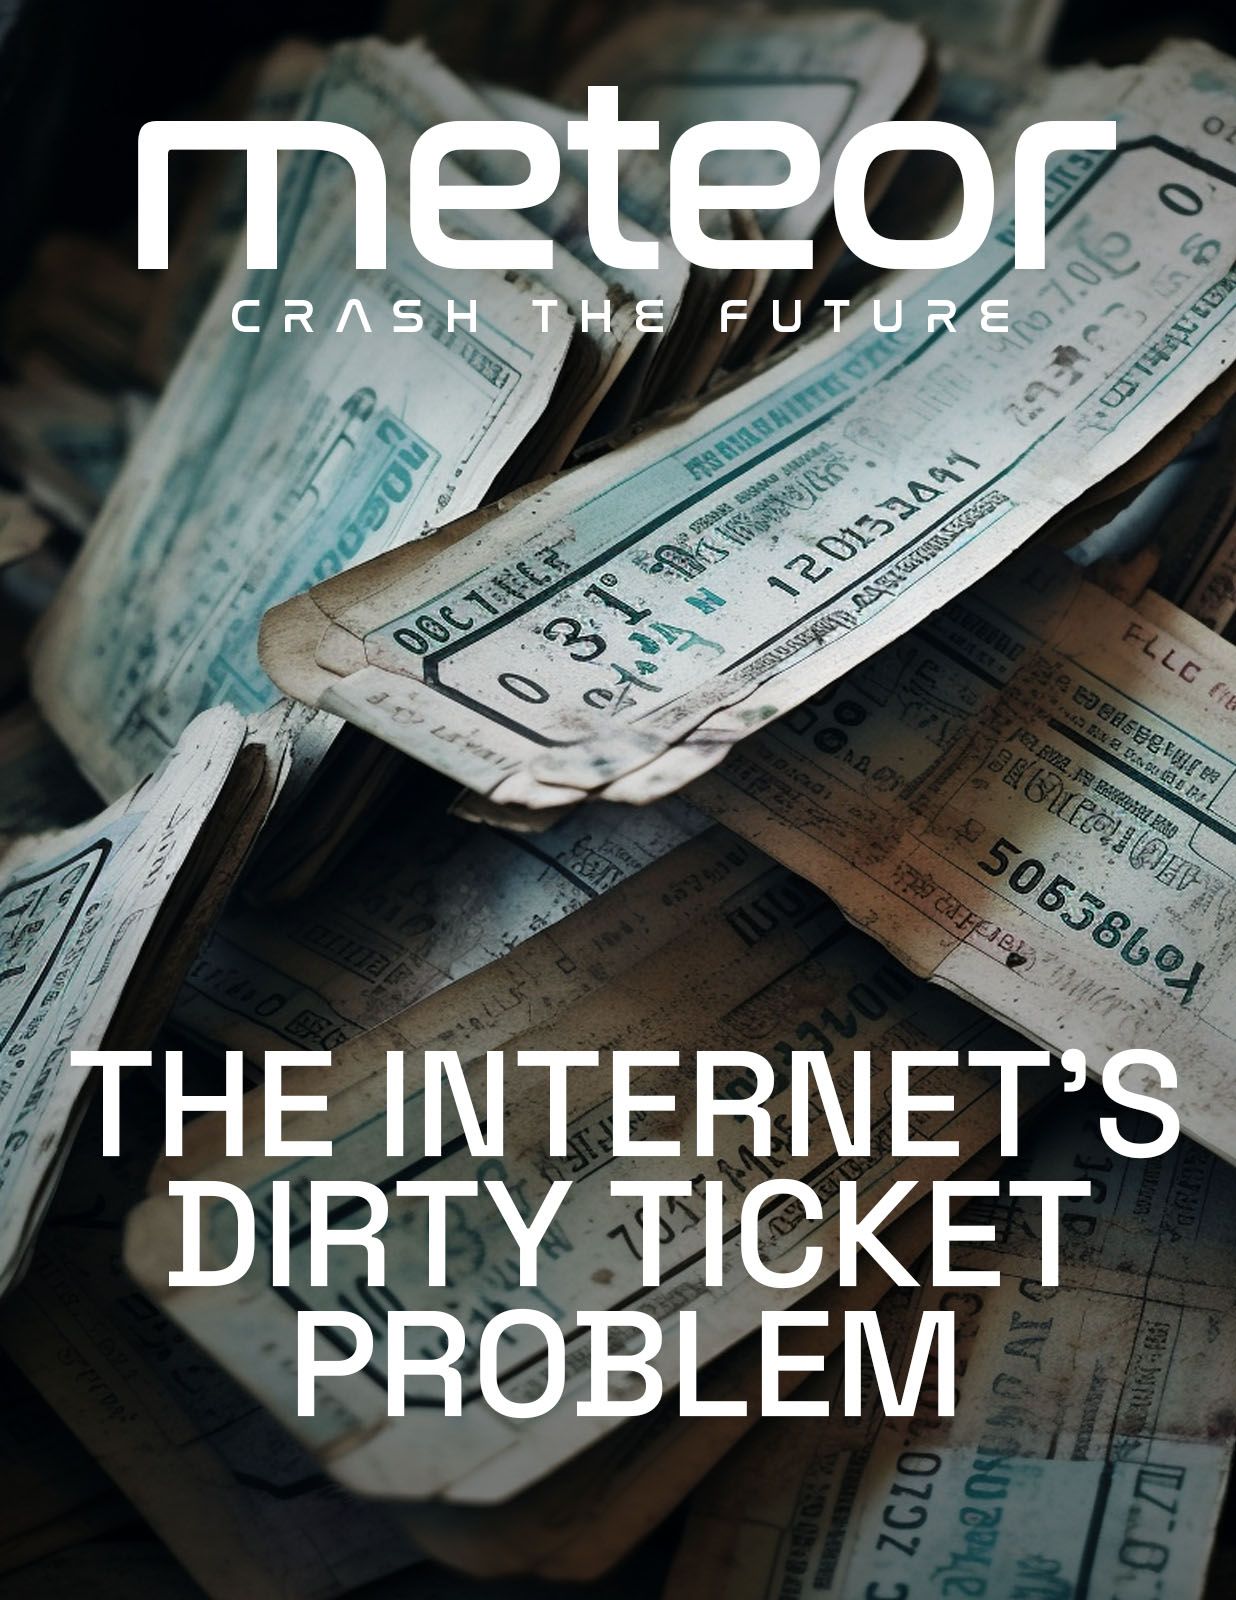 Fixing The Internet's Dirty Ticket Problem